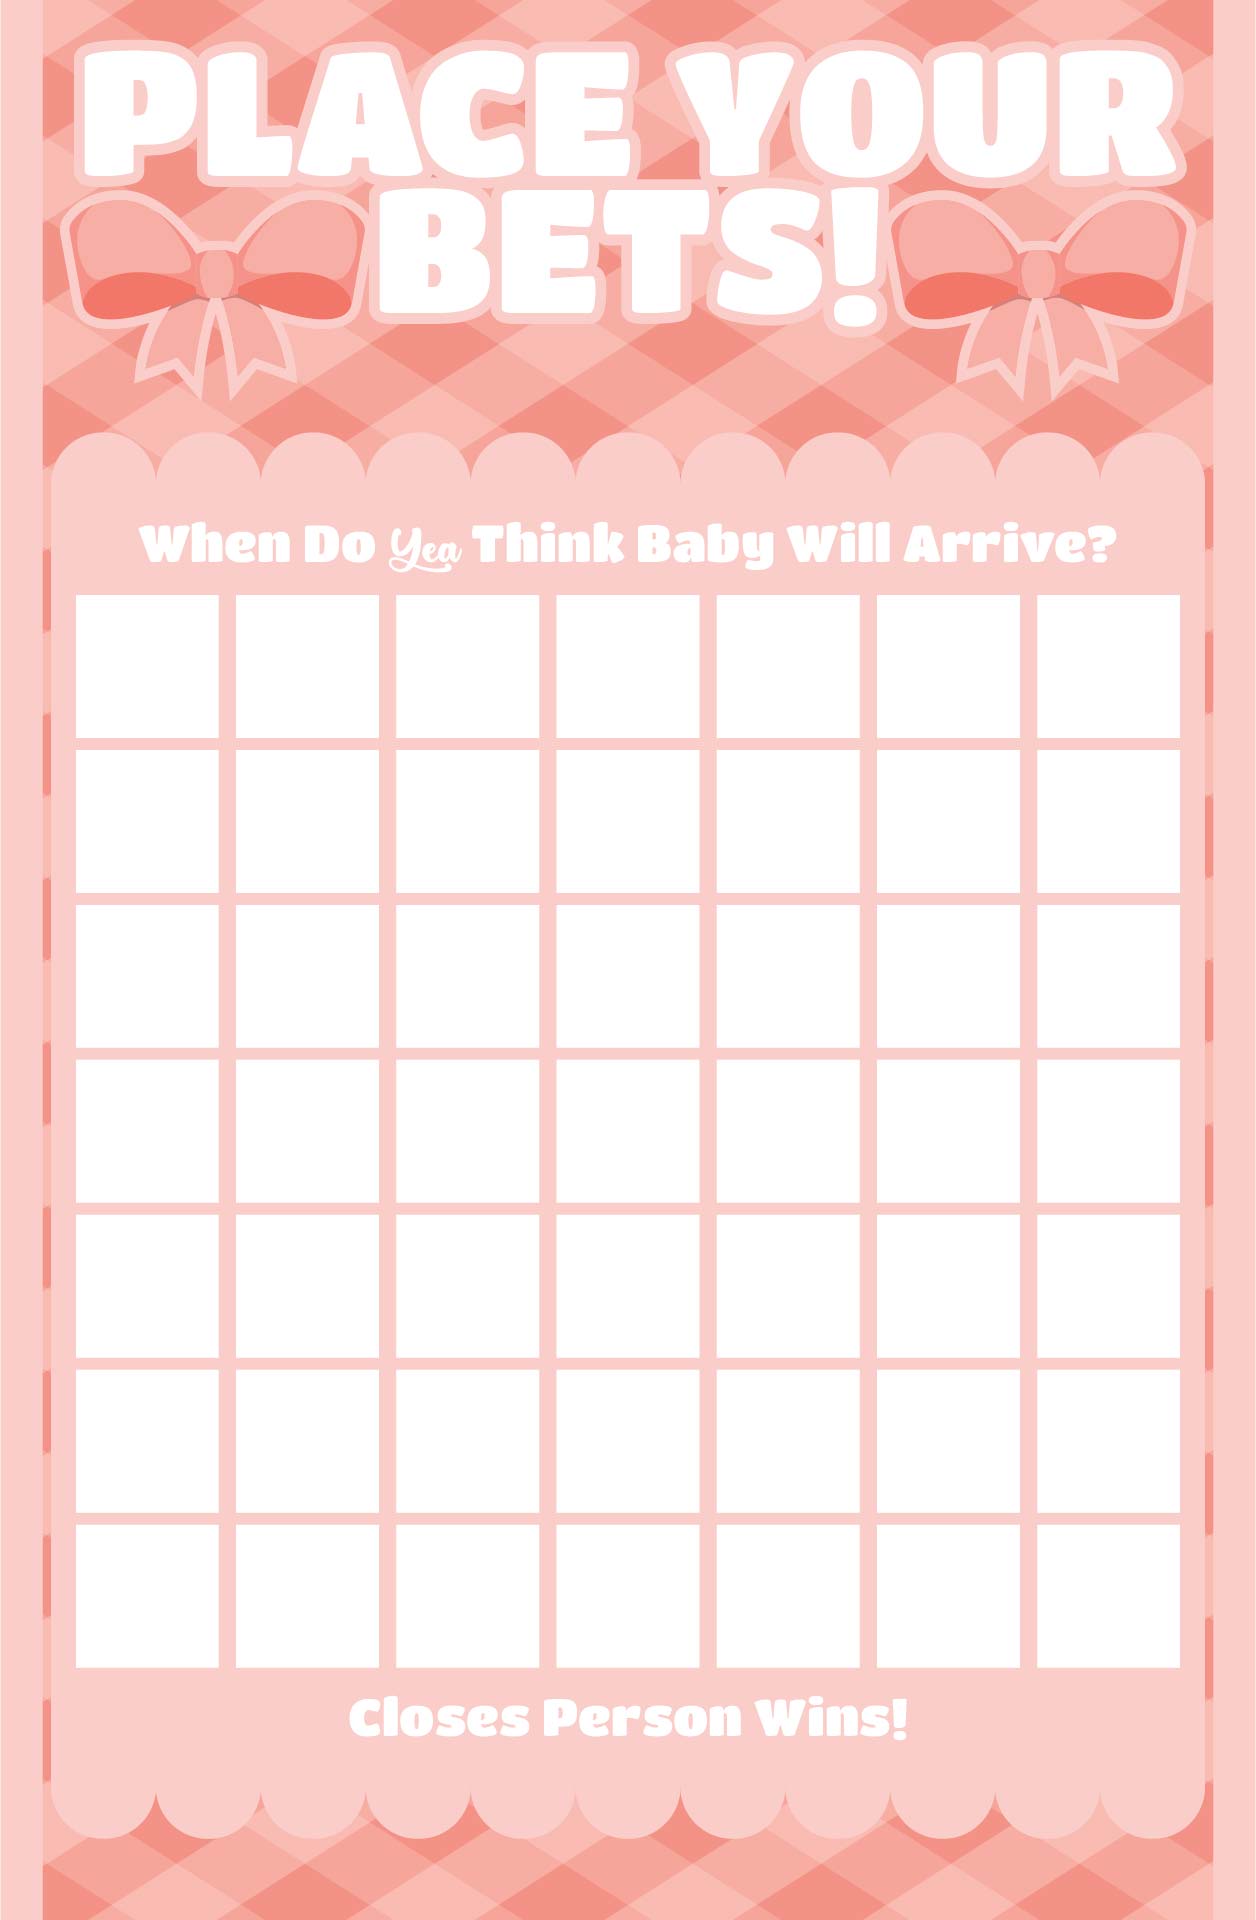 7 Best Images Of Fun Baby Shower Games Printable Karaoke Baby Shower Game Baby Shower Games 